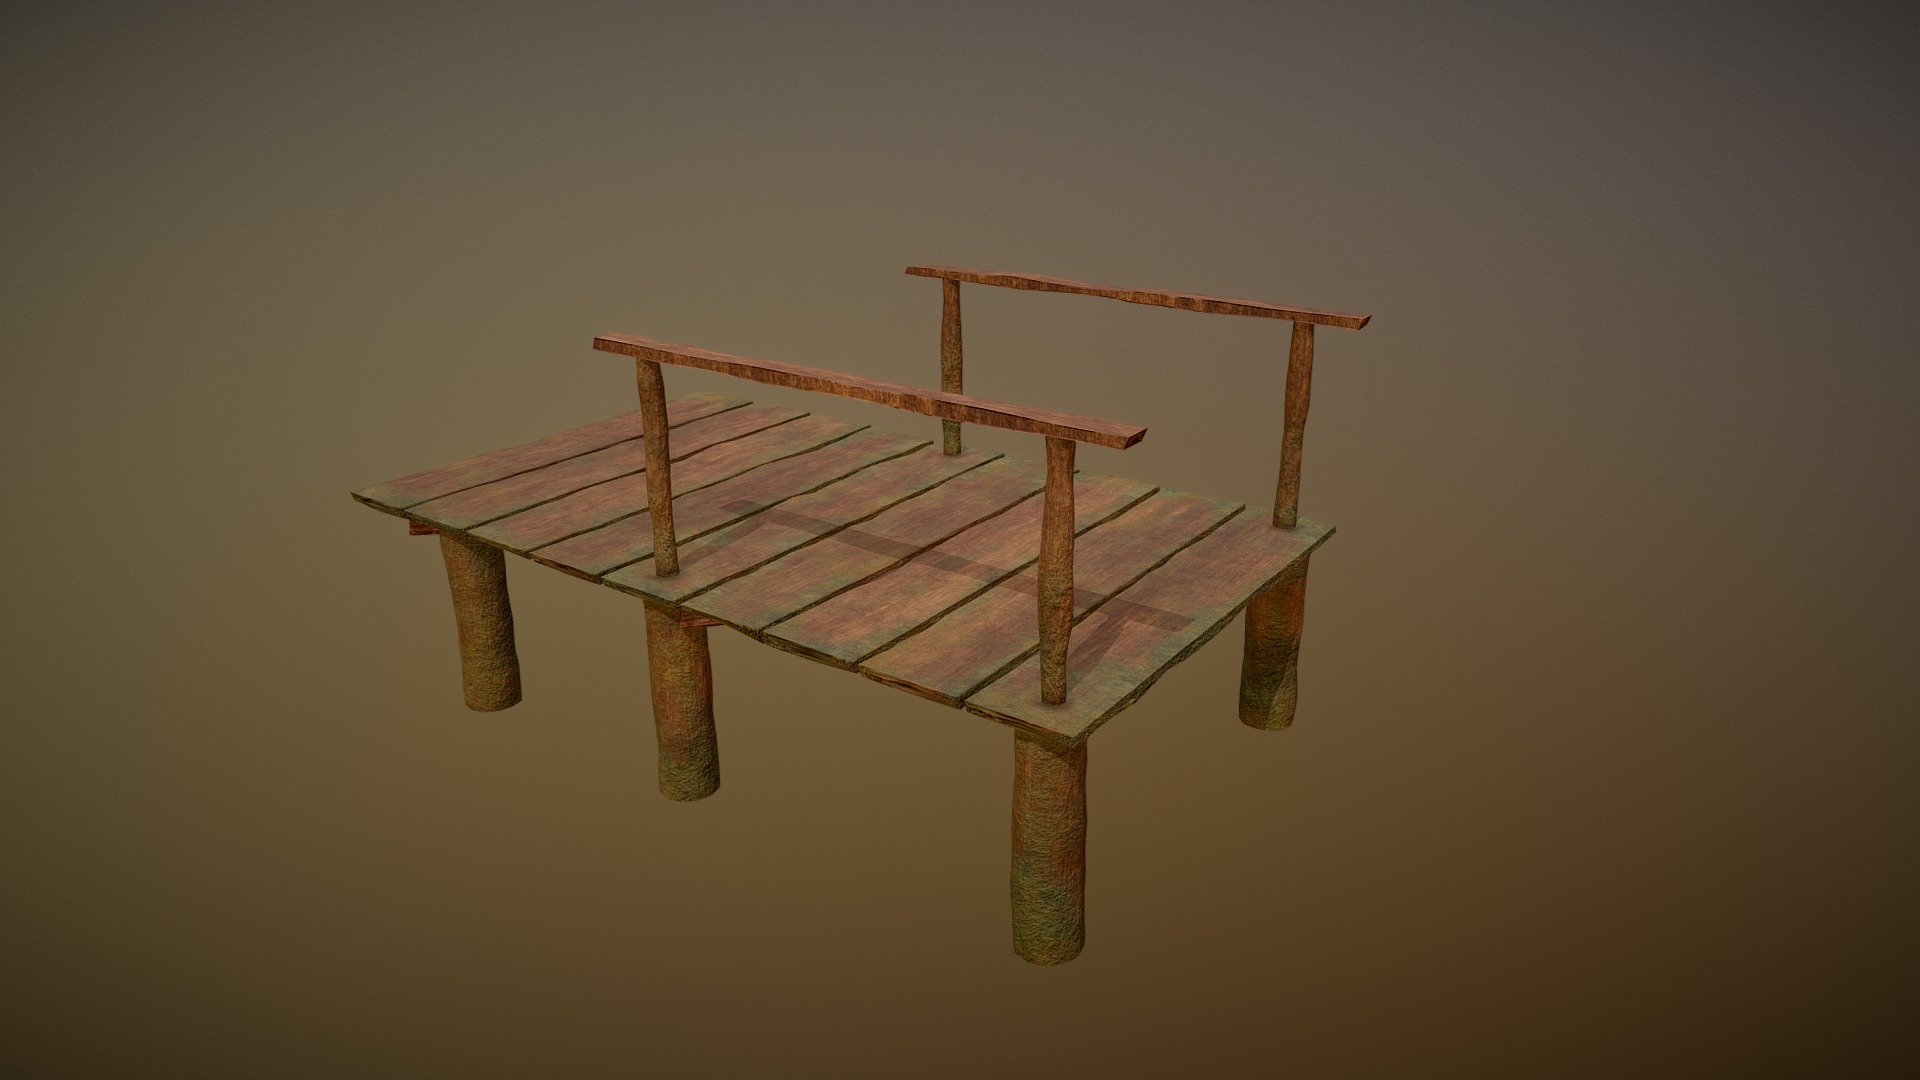 3D model Lake bridge - This is a 3D model of the Lake bridge. The 3D model is about a wooden chair with a wooden frame.